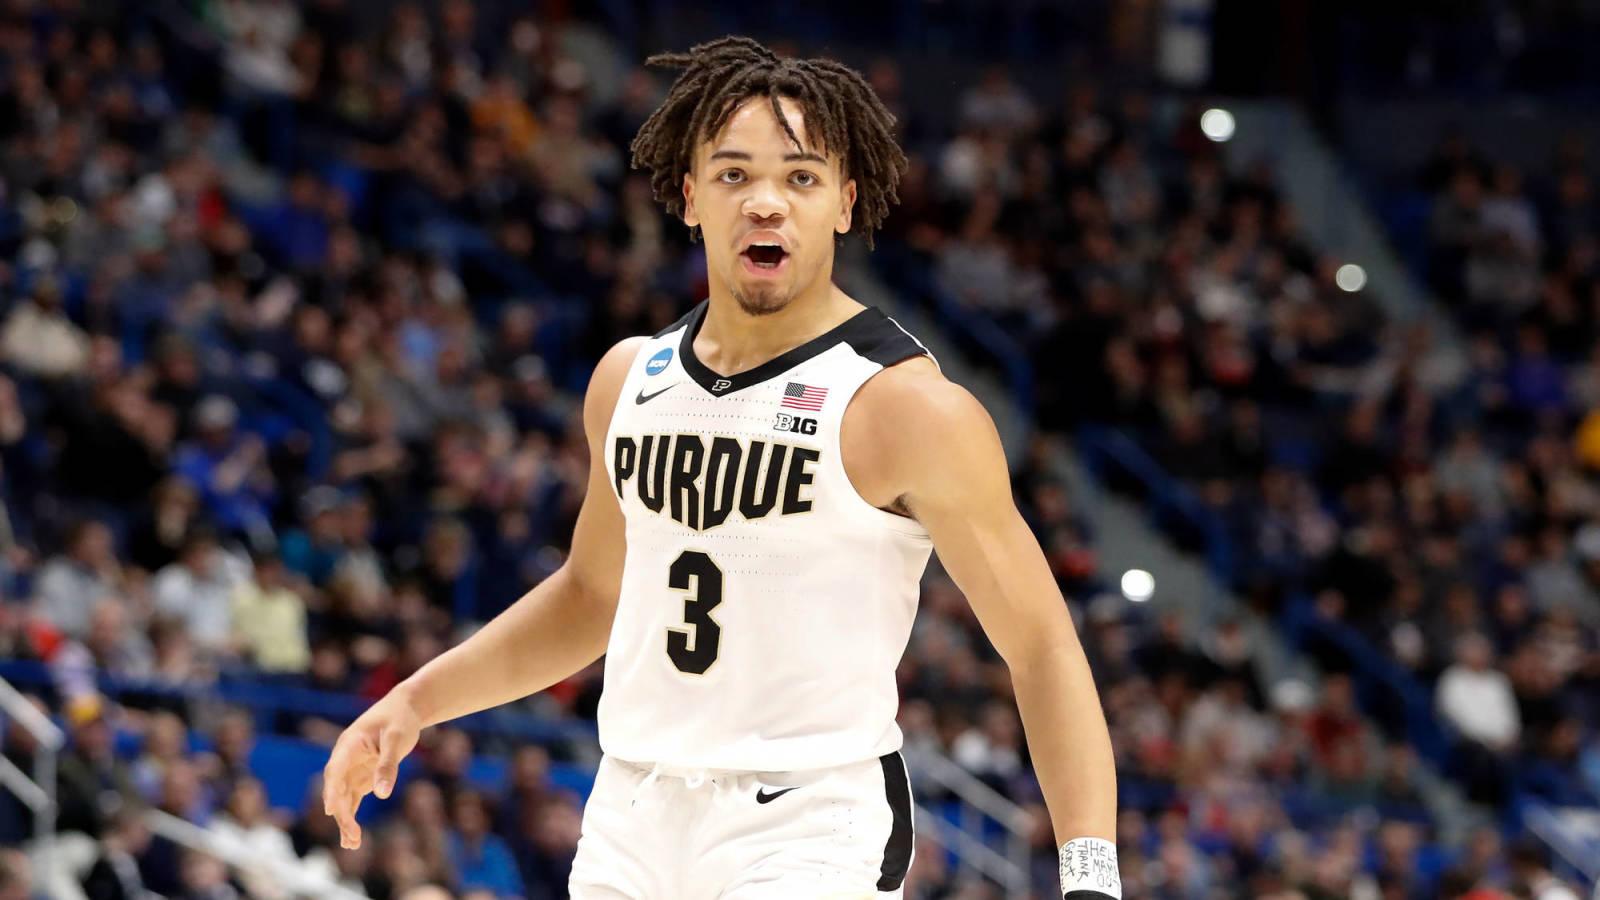 Carsen Edwards to hire agent, enter 2019 NBA Draft